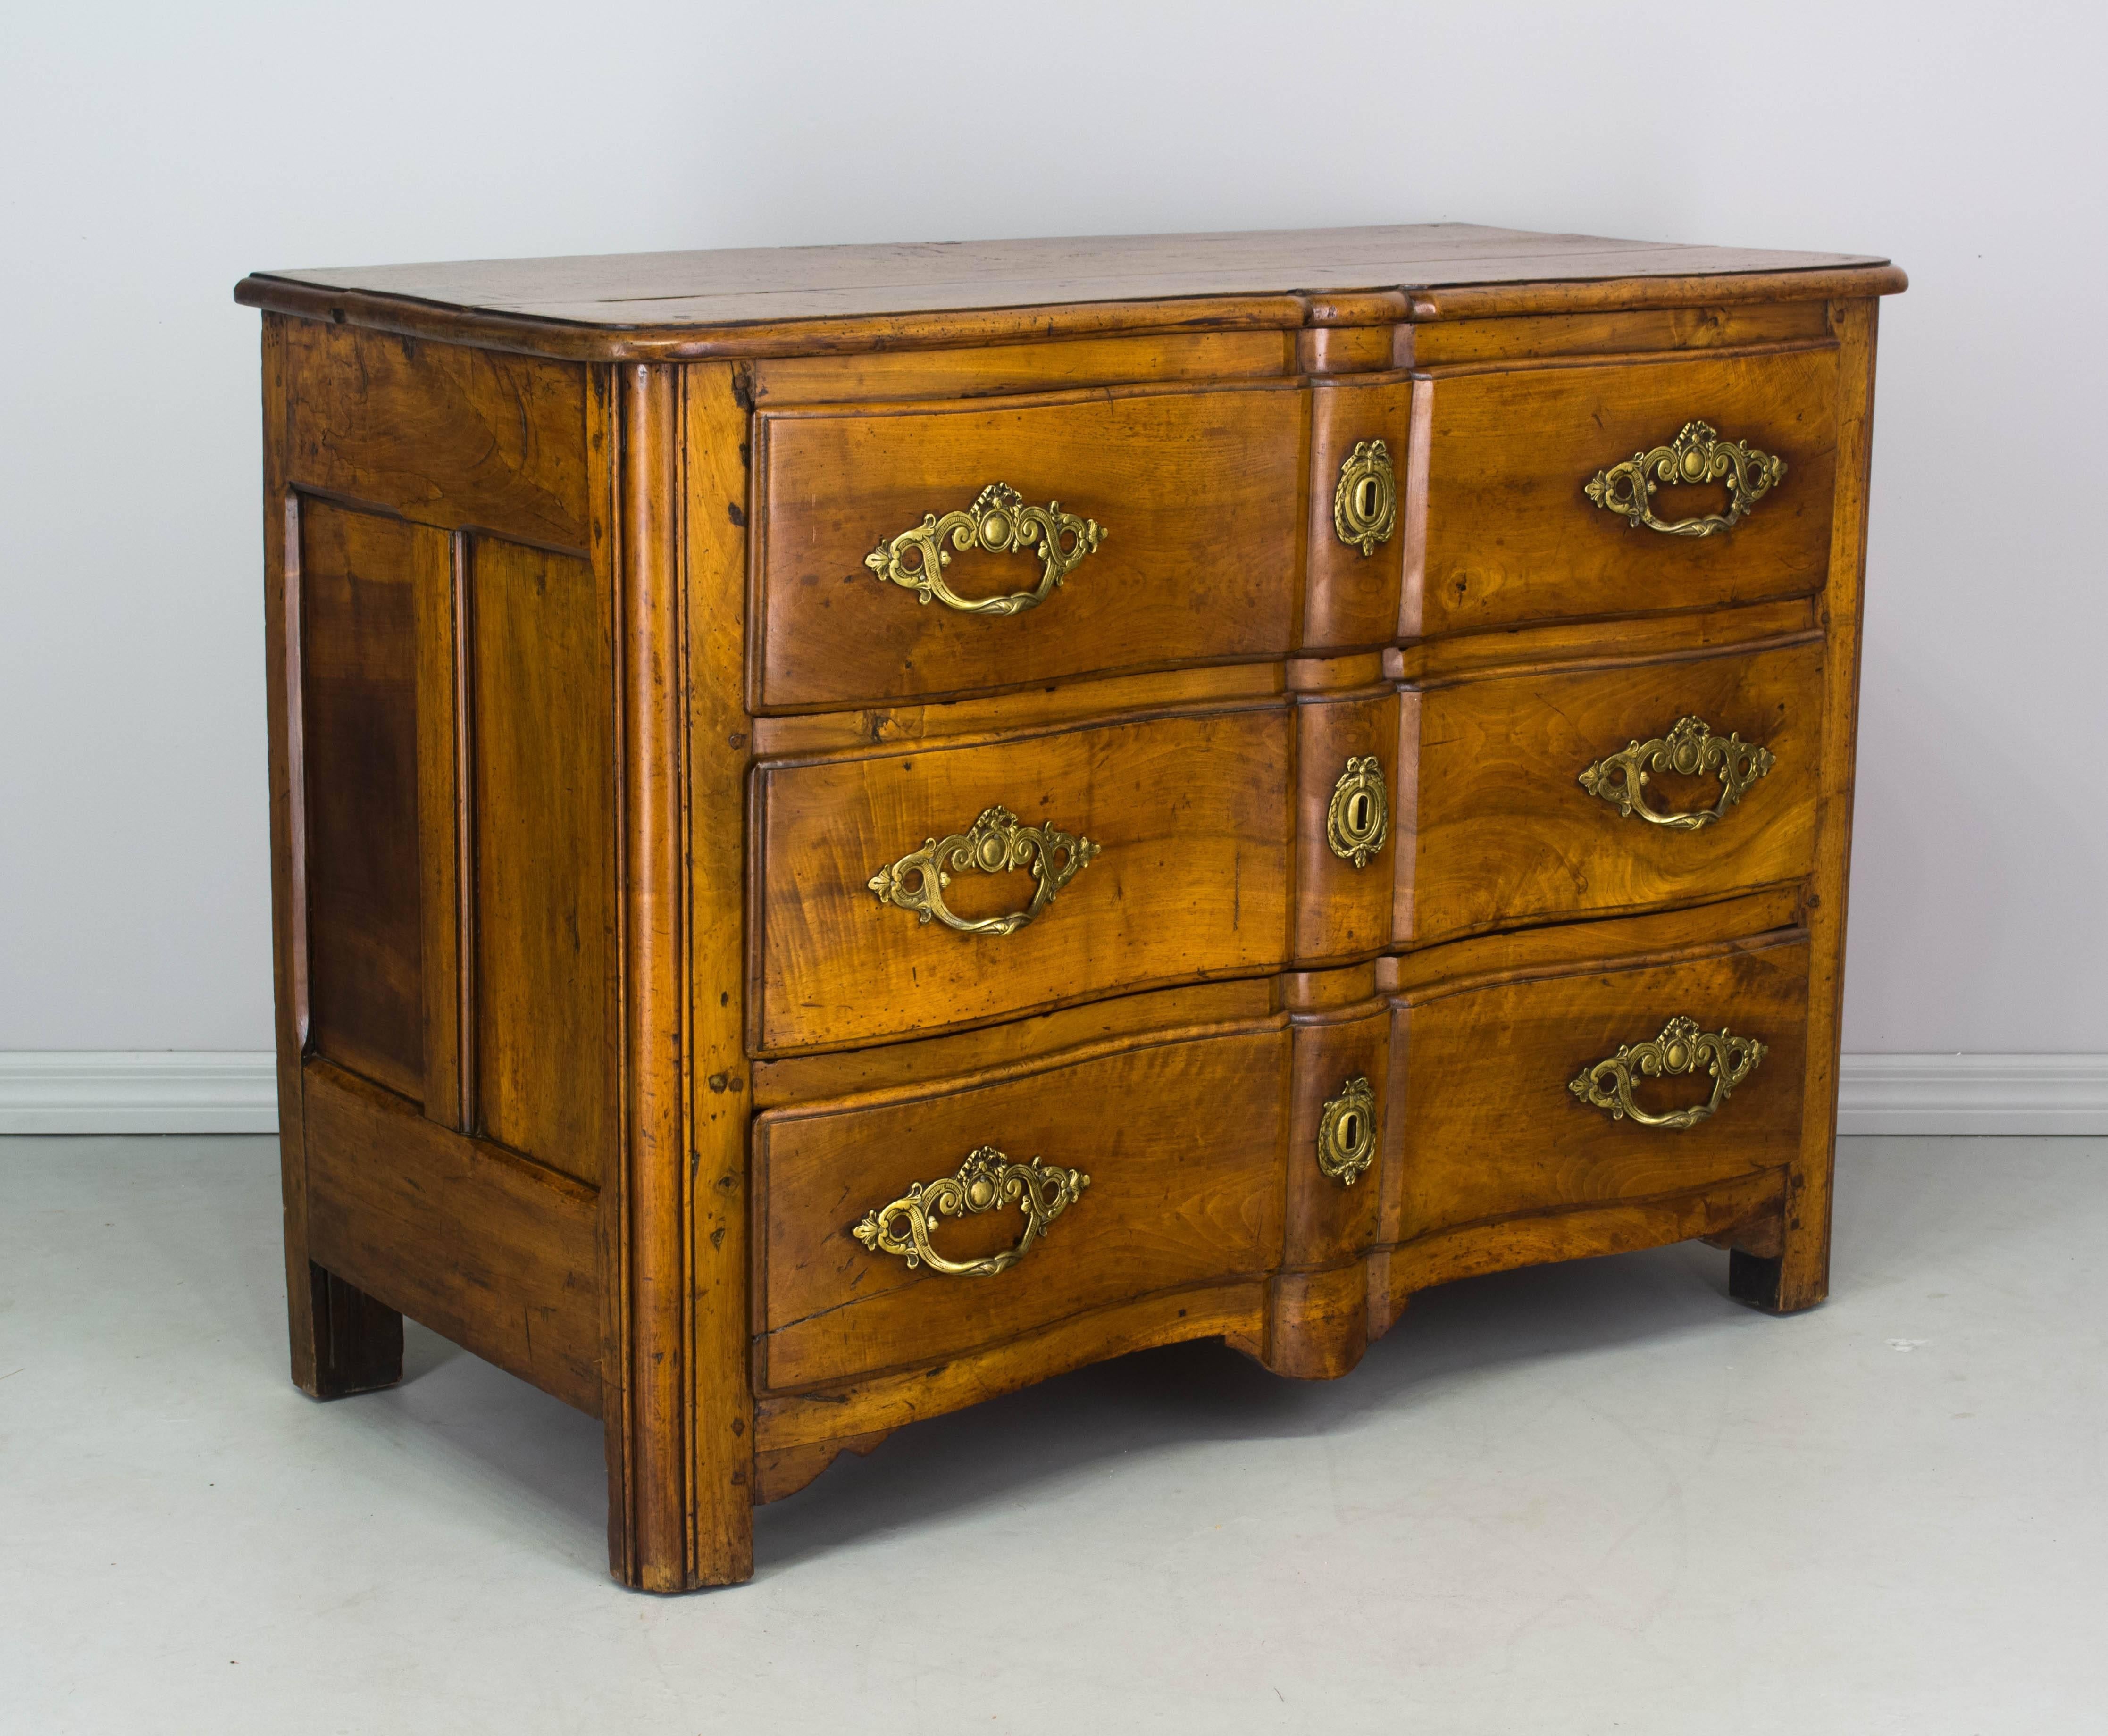 18th century French Regence commode with serpentine front and three dovetailed drawers. Made of solid blonde walnut with beautiful wood grain. Waxed finish. Original bronze hardware, no key. Restoration on top corner of one drawer. The back of one